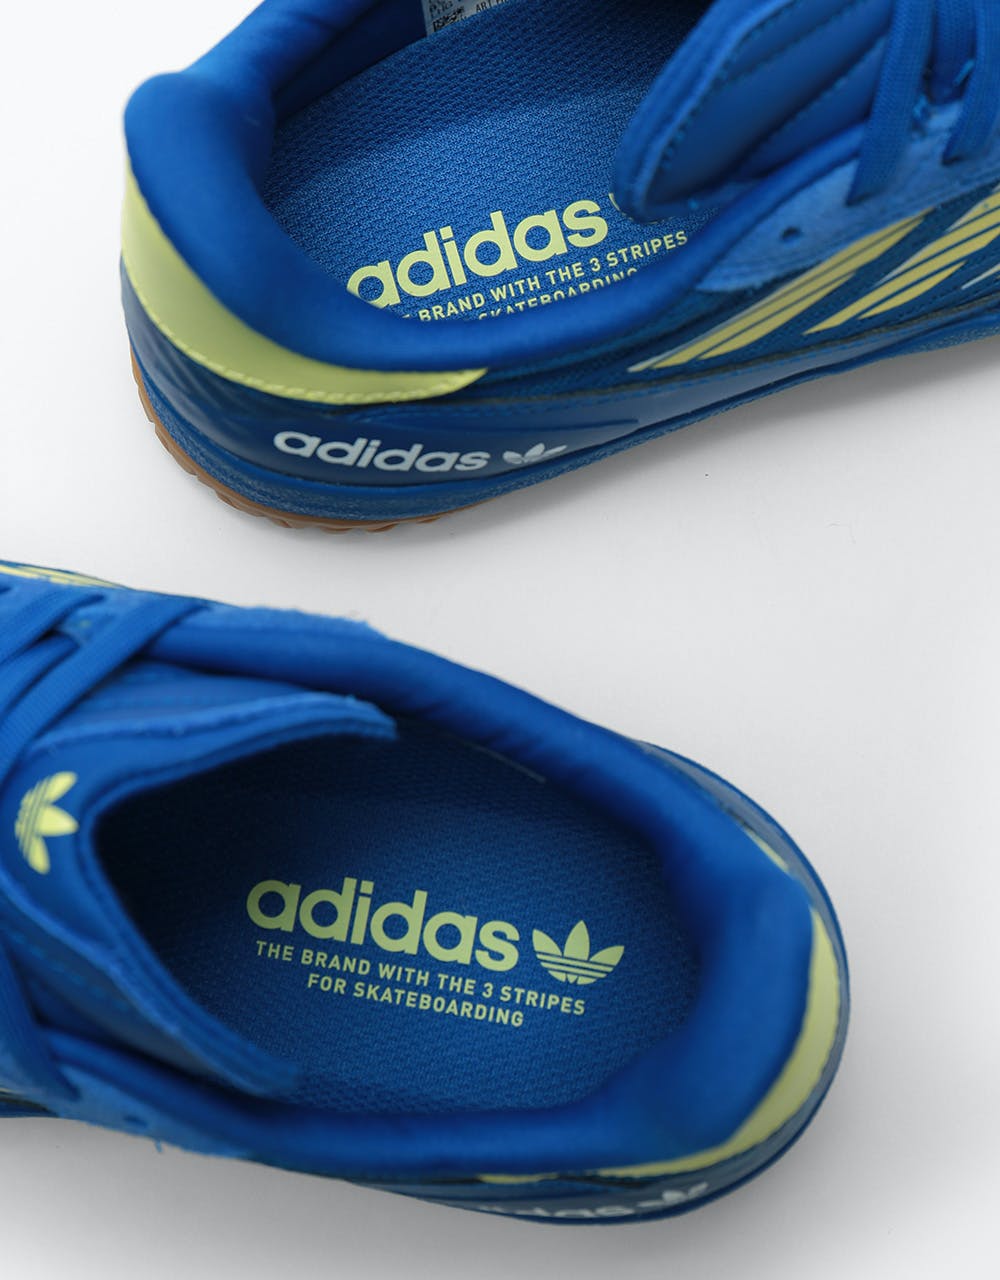 Adidas Copa Nationale Skate Shoes - Team Royal Blue/Yellow Tint/White